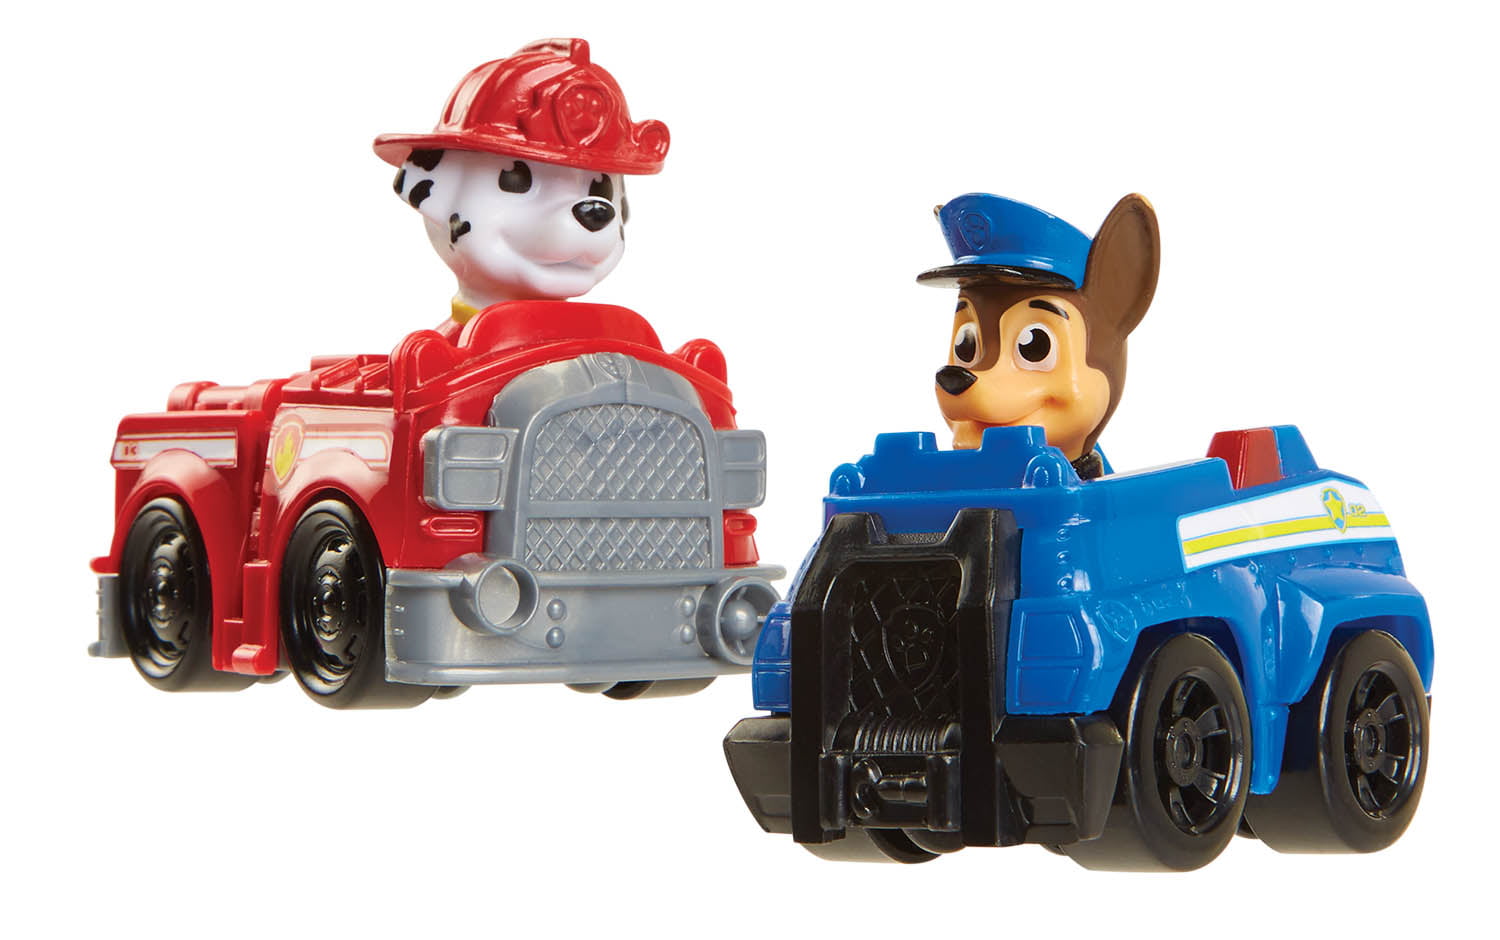 PAW Patrol Patroller Ride-On Includes Chase and Marshall Mini Vehicles - 3